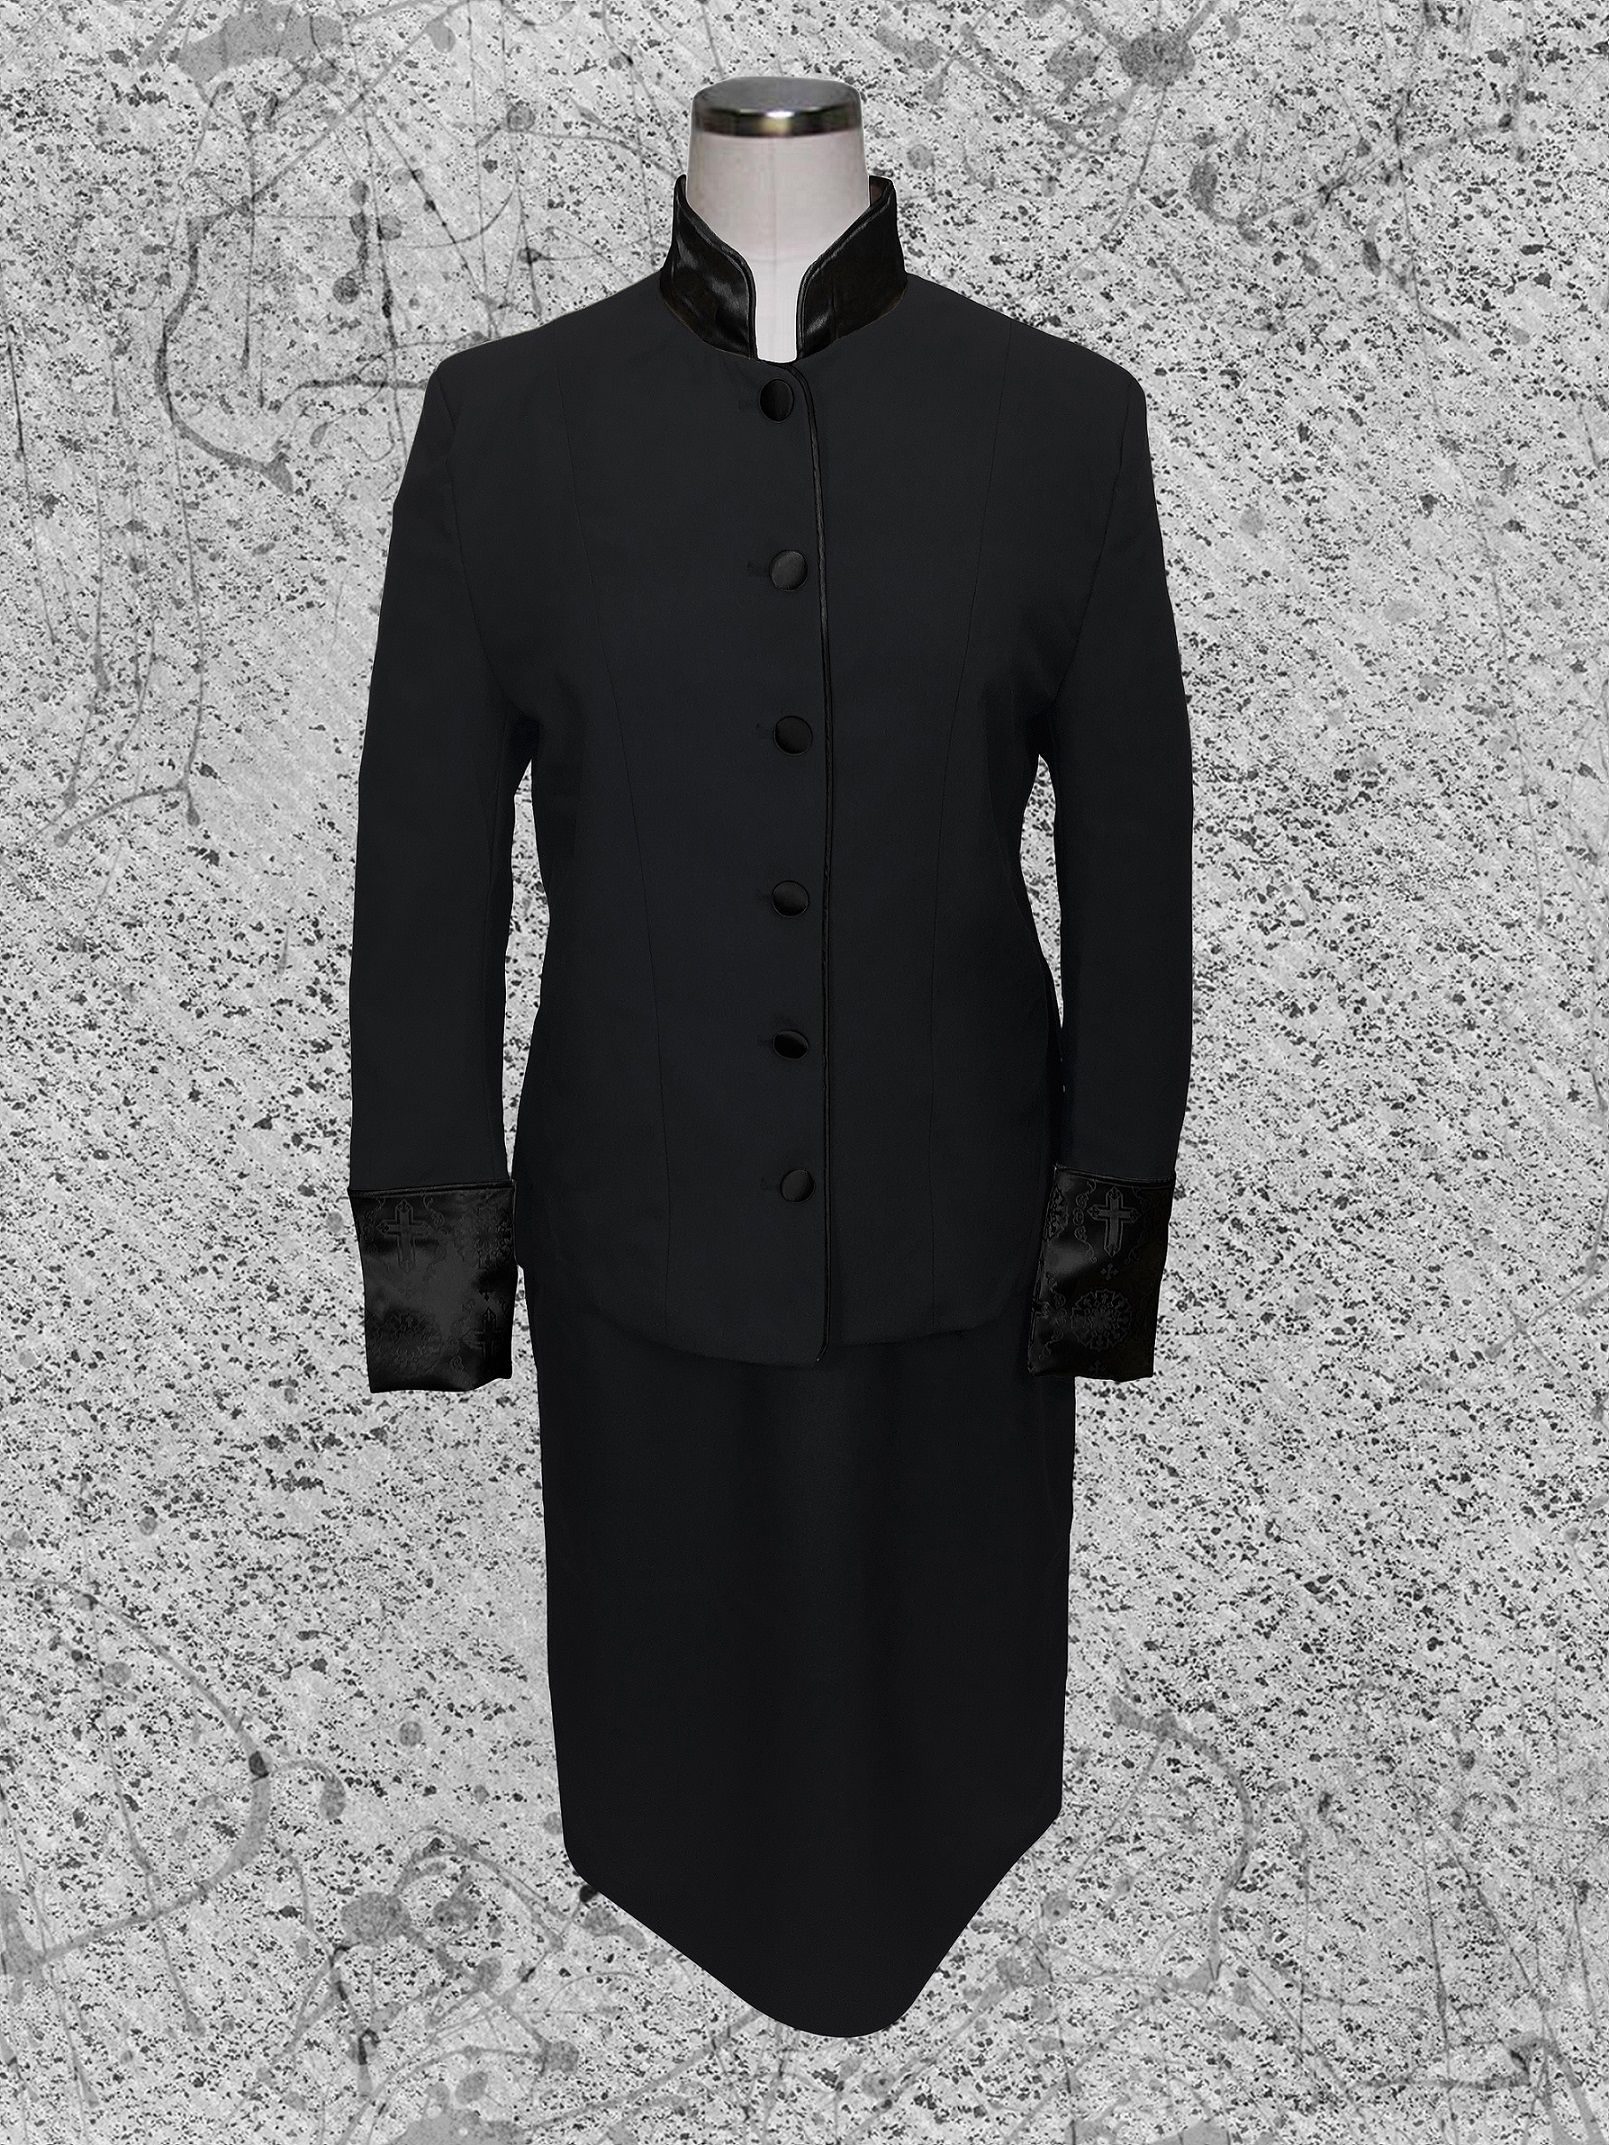 731 W. Women's 2 Pc. Clergy Suit Black with Double Tone Black Brocade